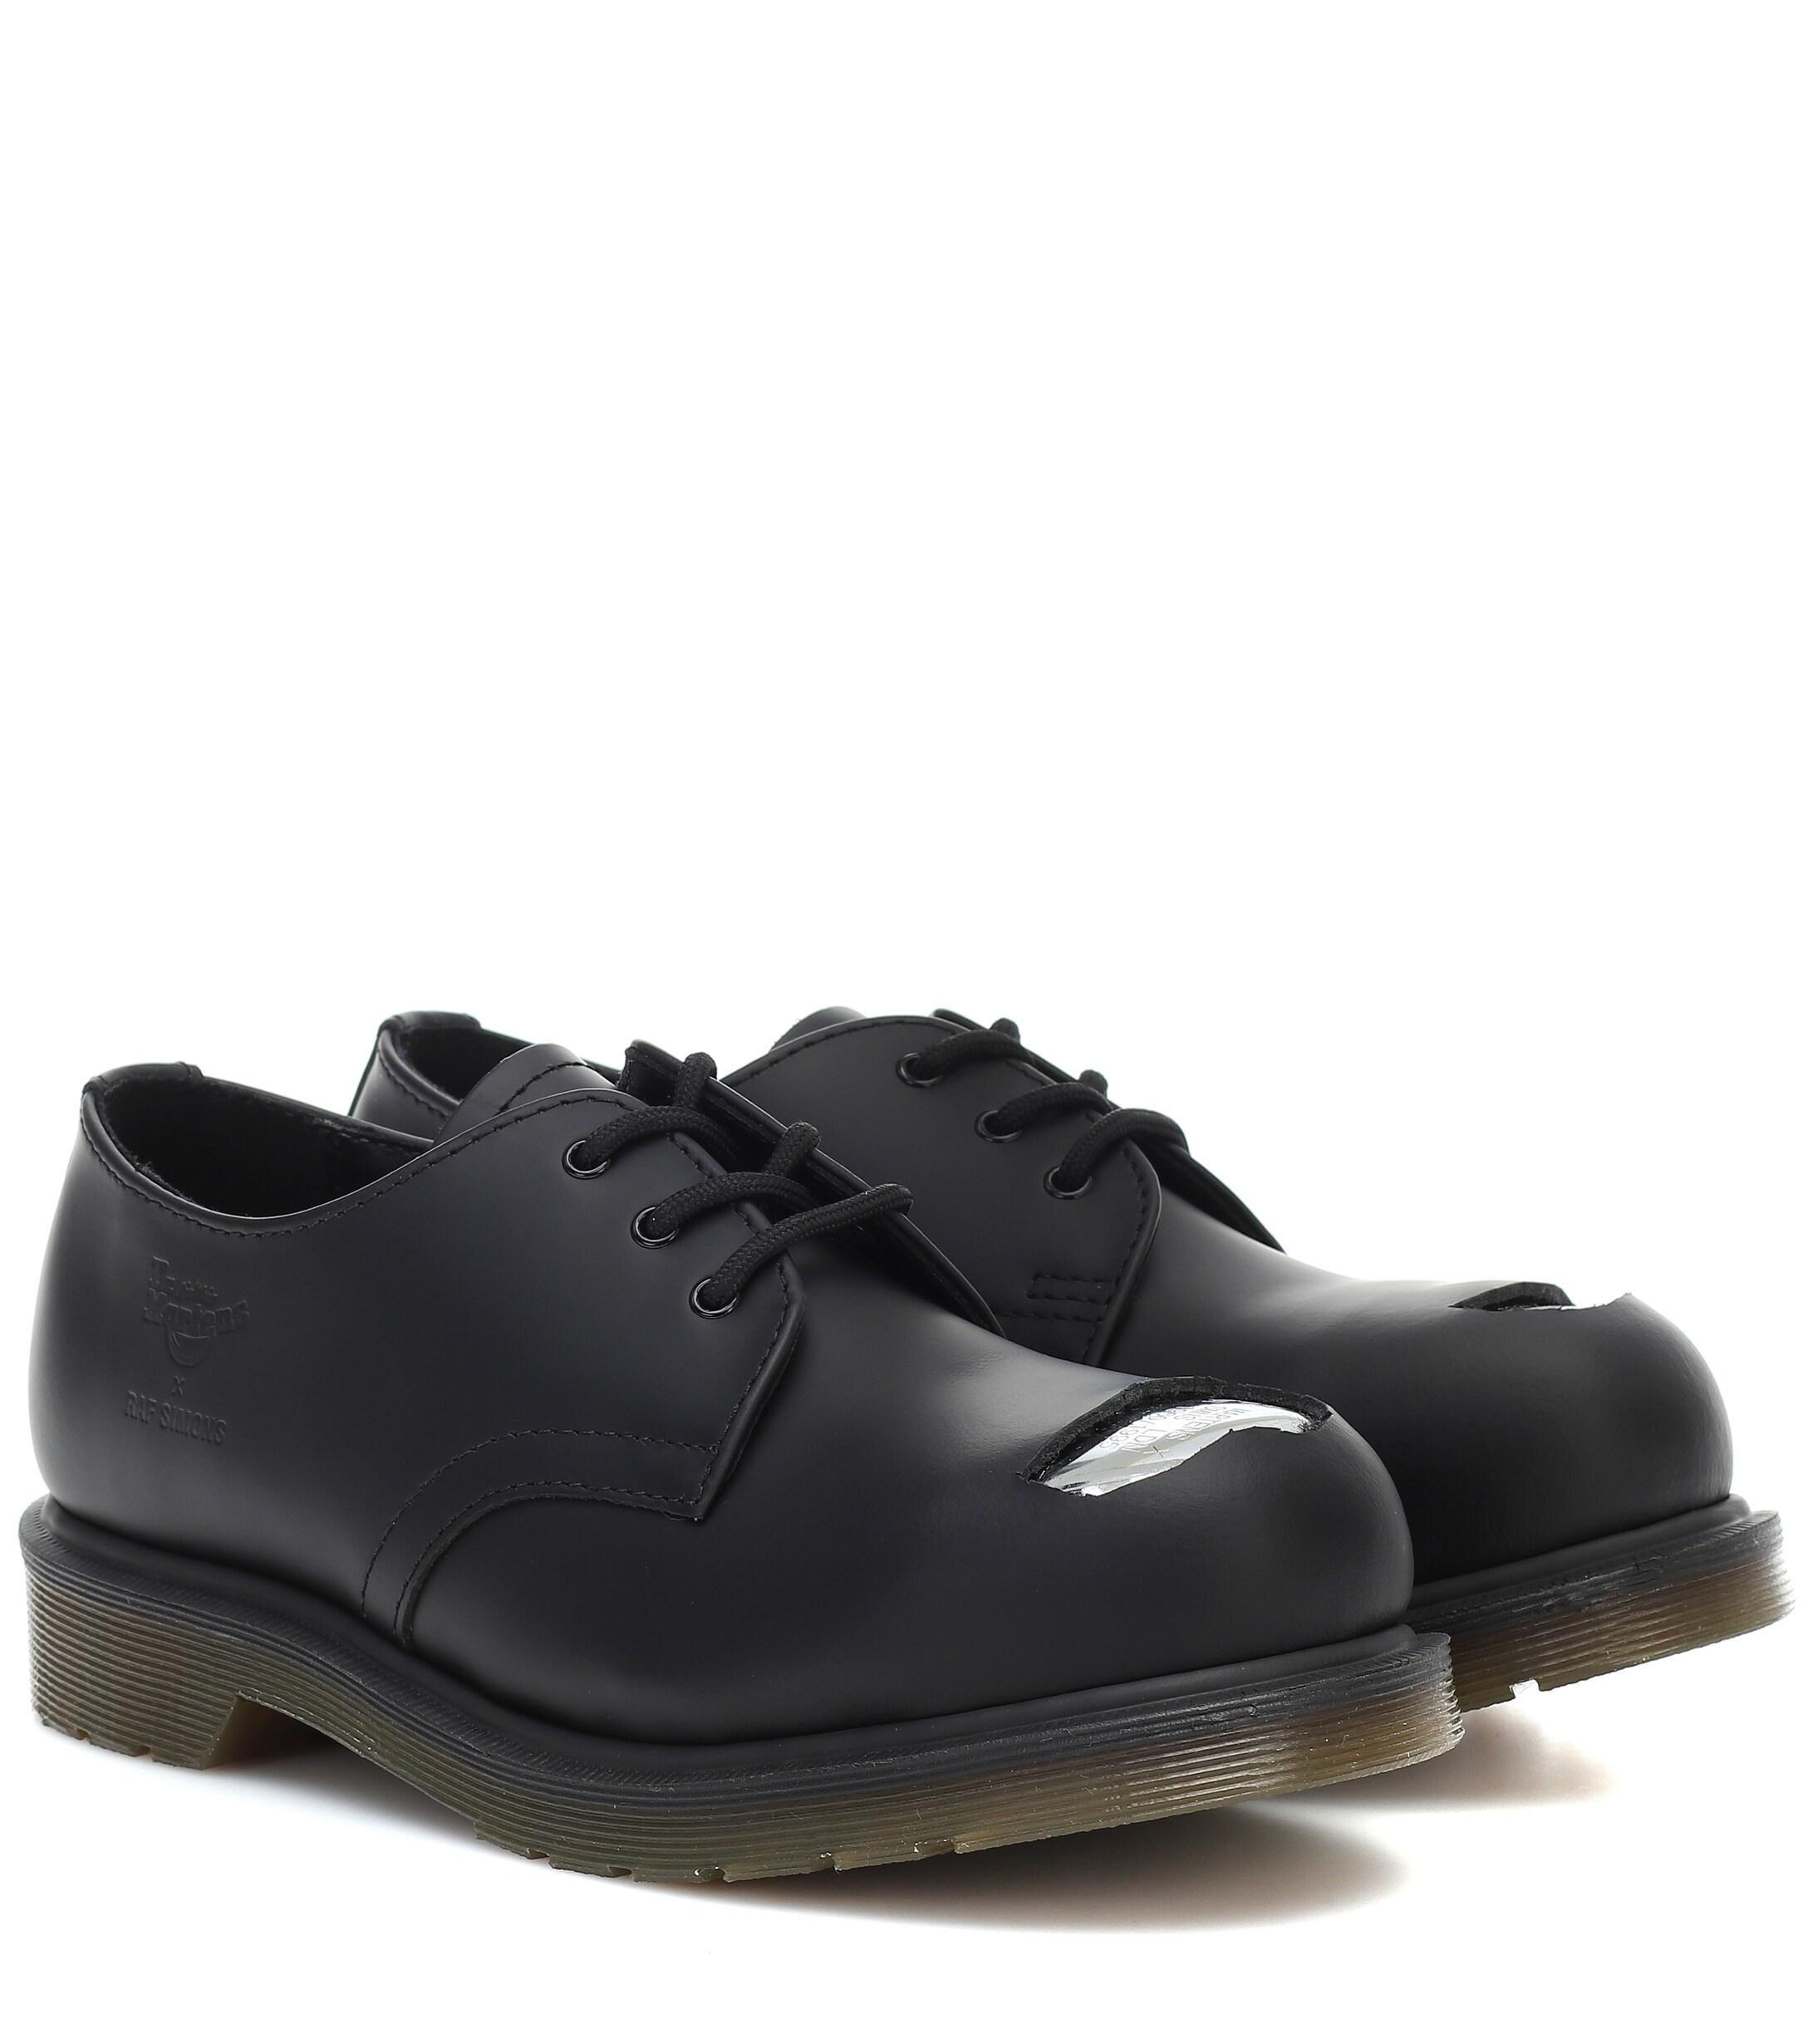 Raf Simons X Dr. Martens Leather Derby Shoes in Black | Lyst